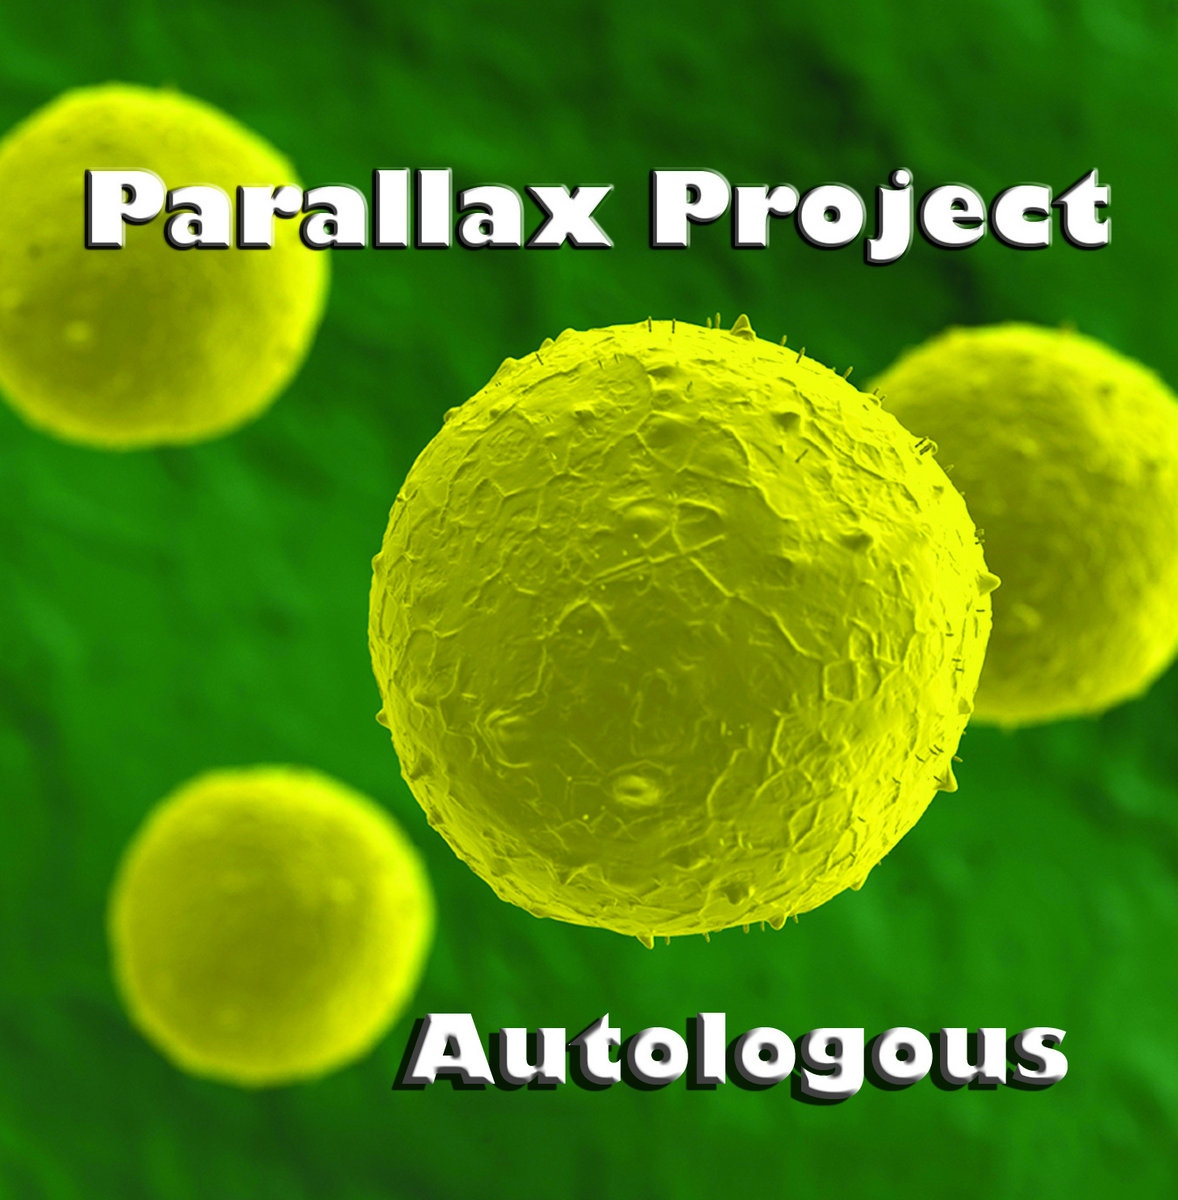 Parallax Project